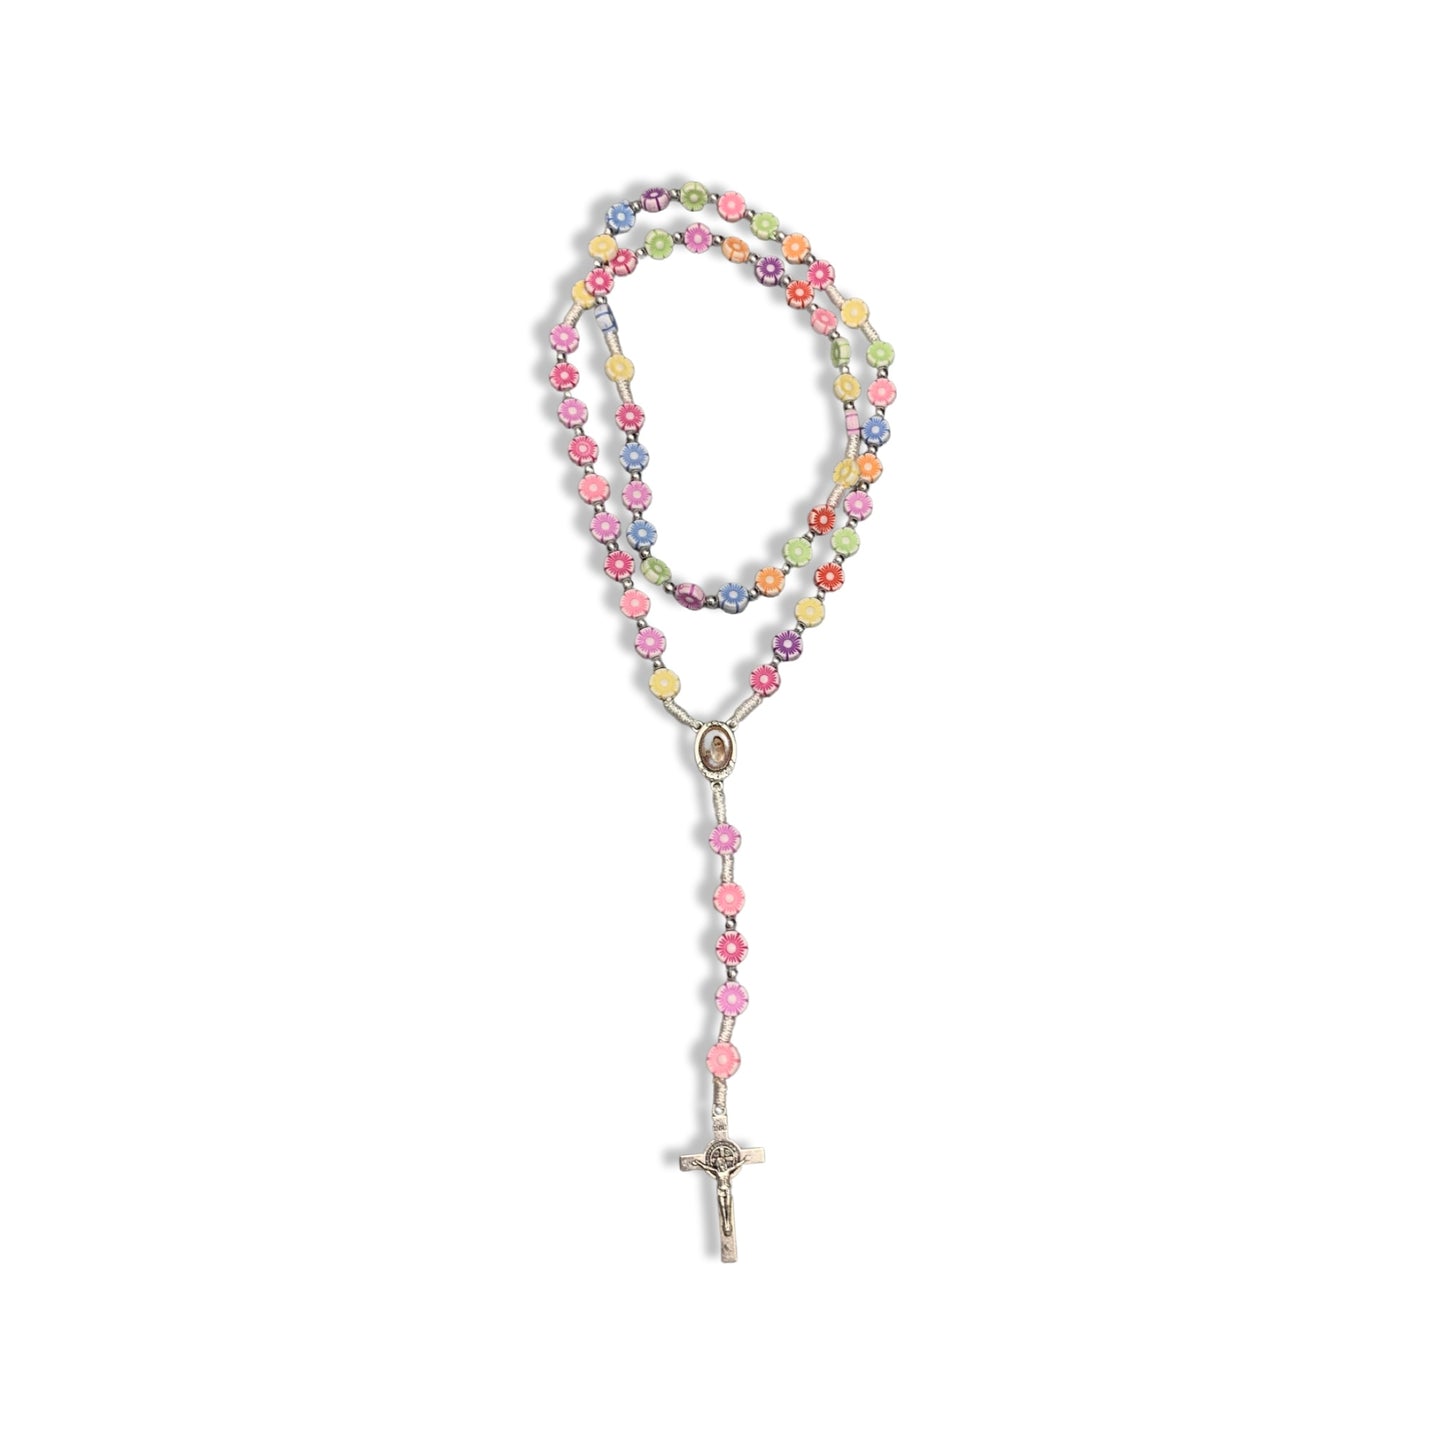 Our Lady's Flower Garden Rosary